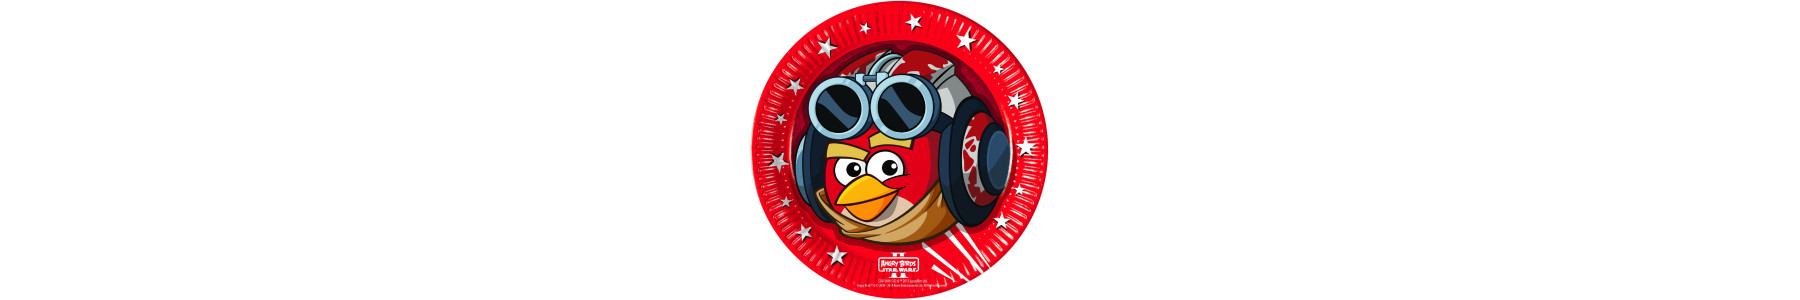 Articole party Angry Birds Star Wars